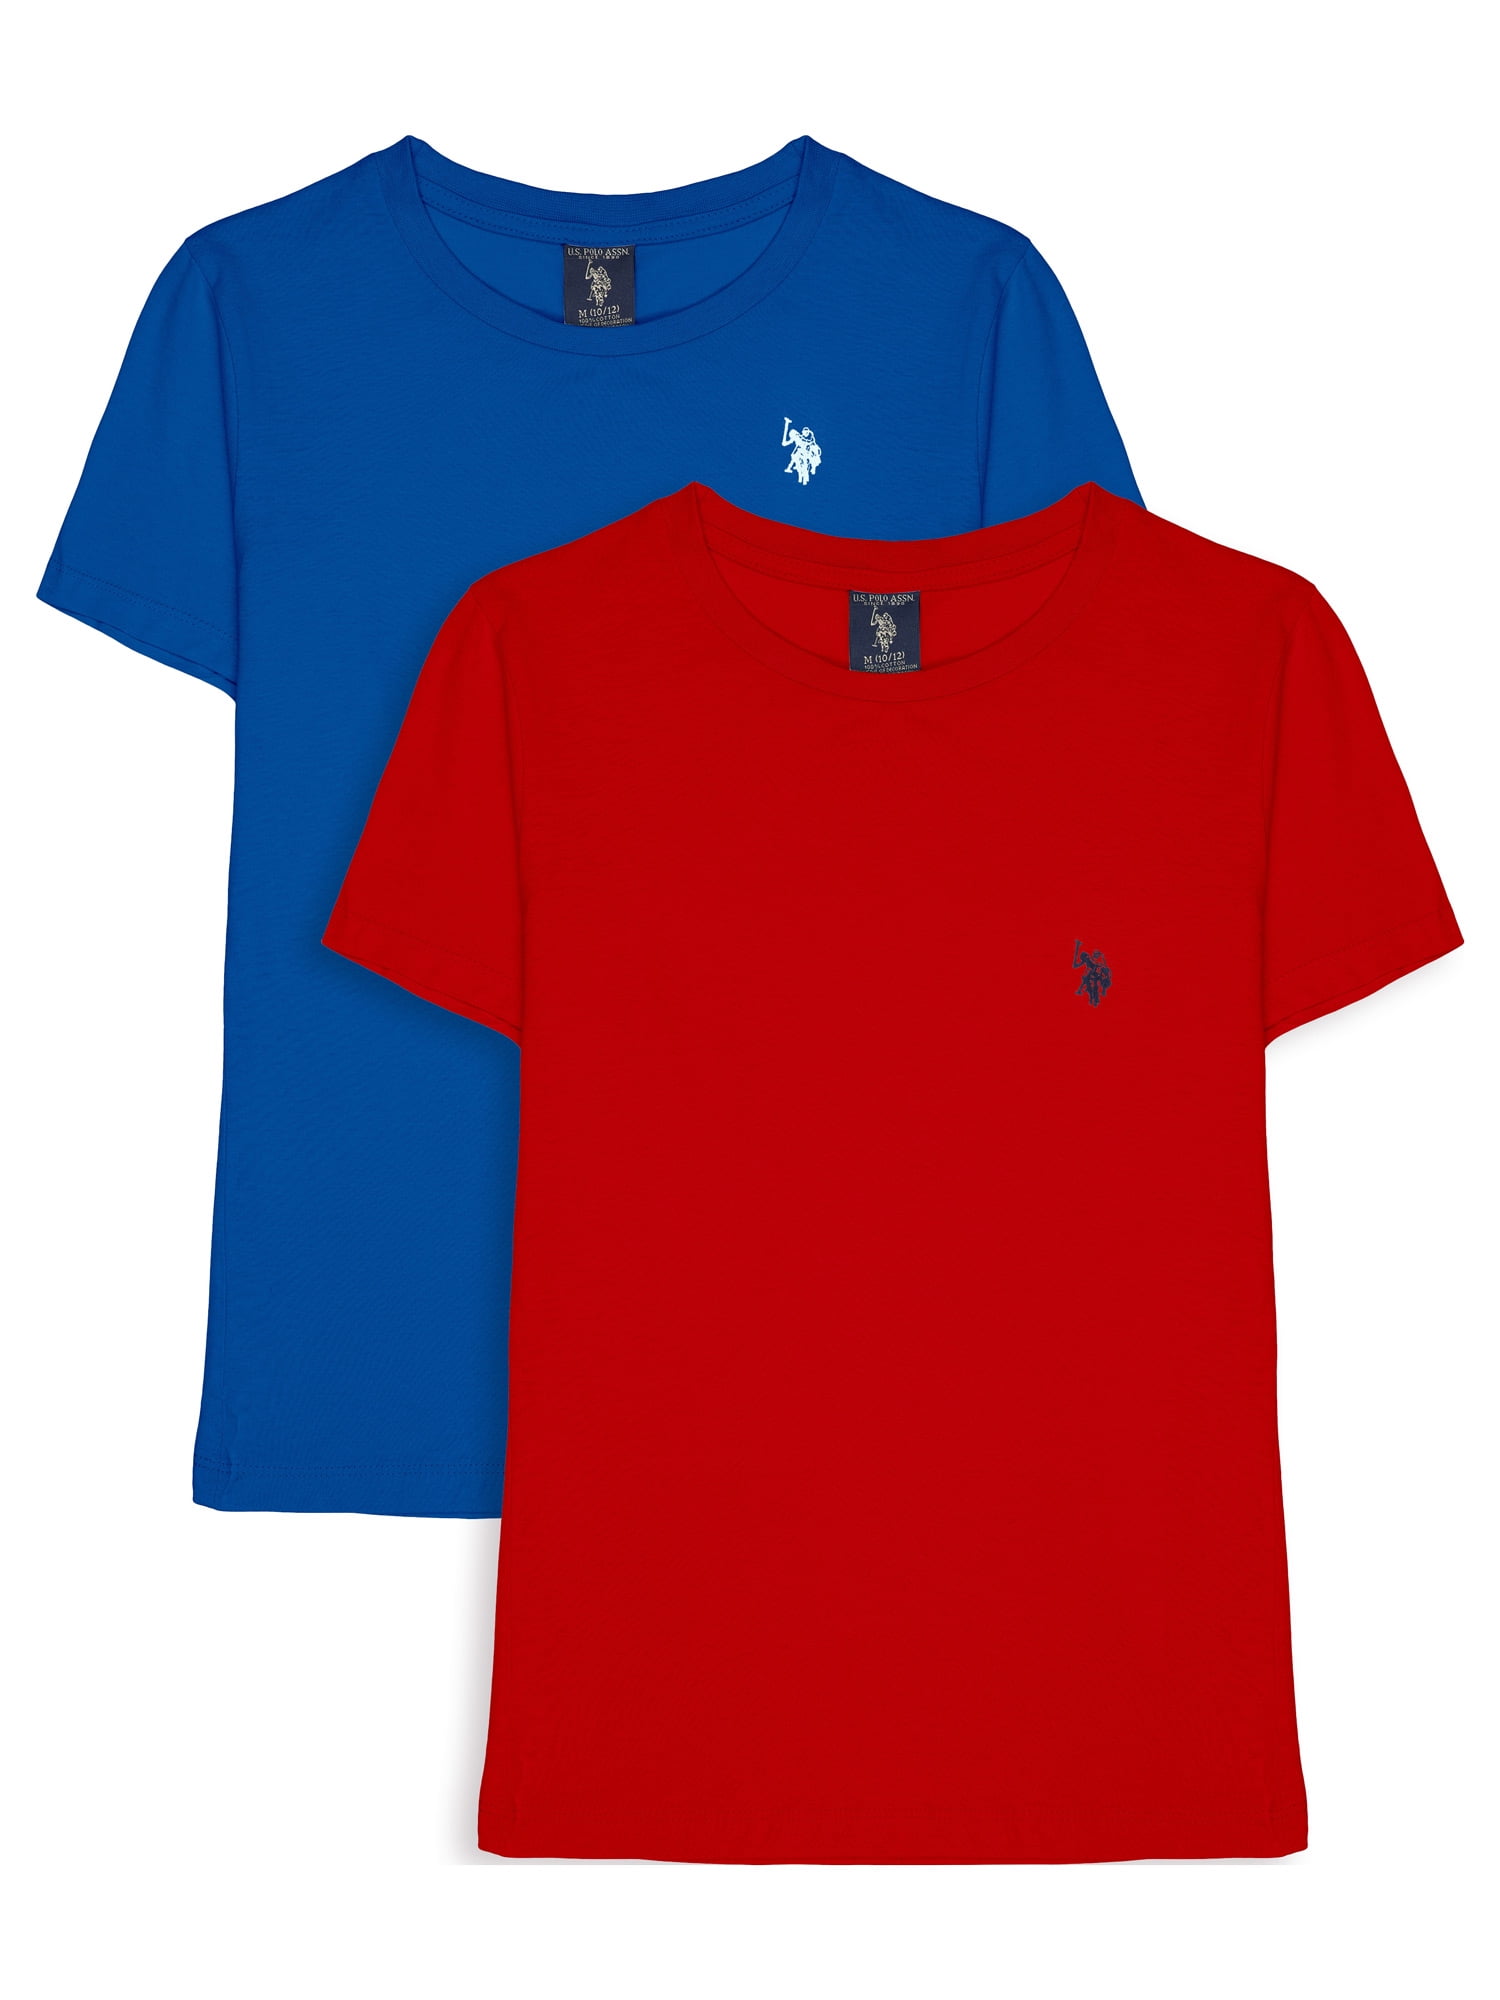 New Boys US Polo Assn Short & Long Sleeve T Shirts Branded Tops Age 3 to 12 